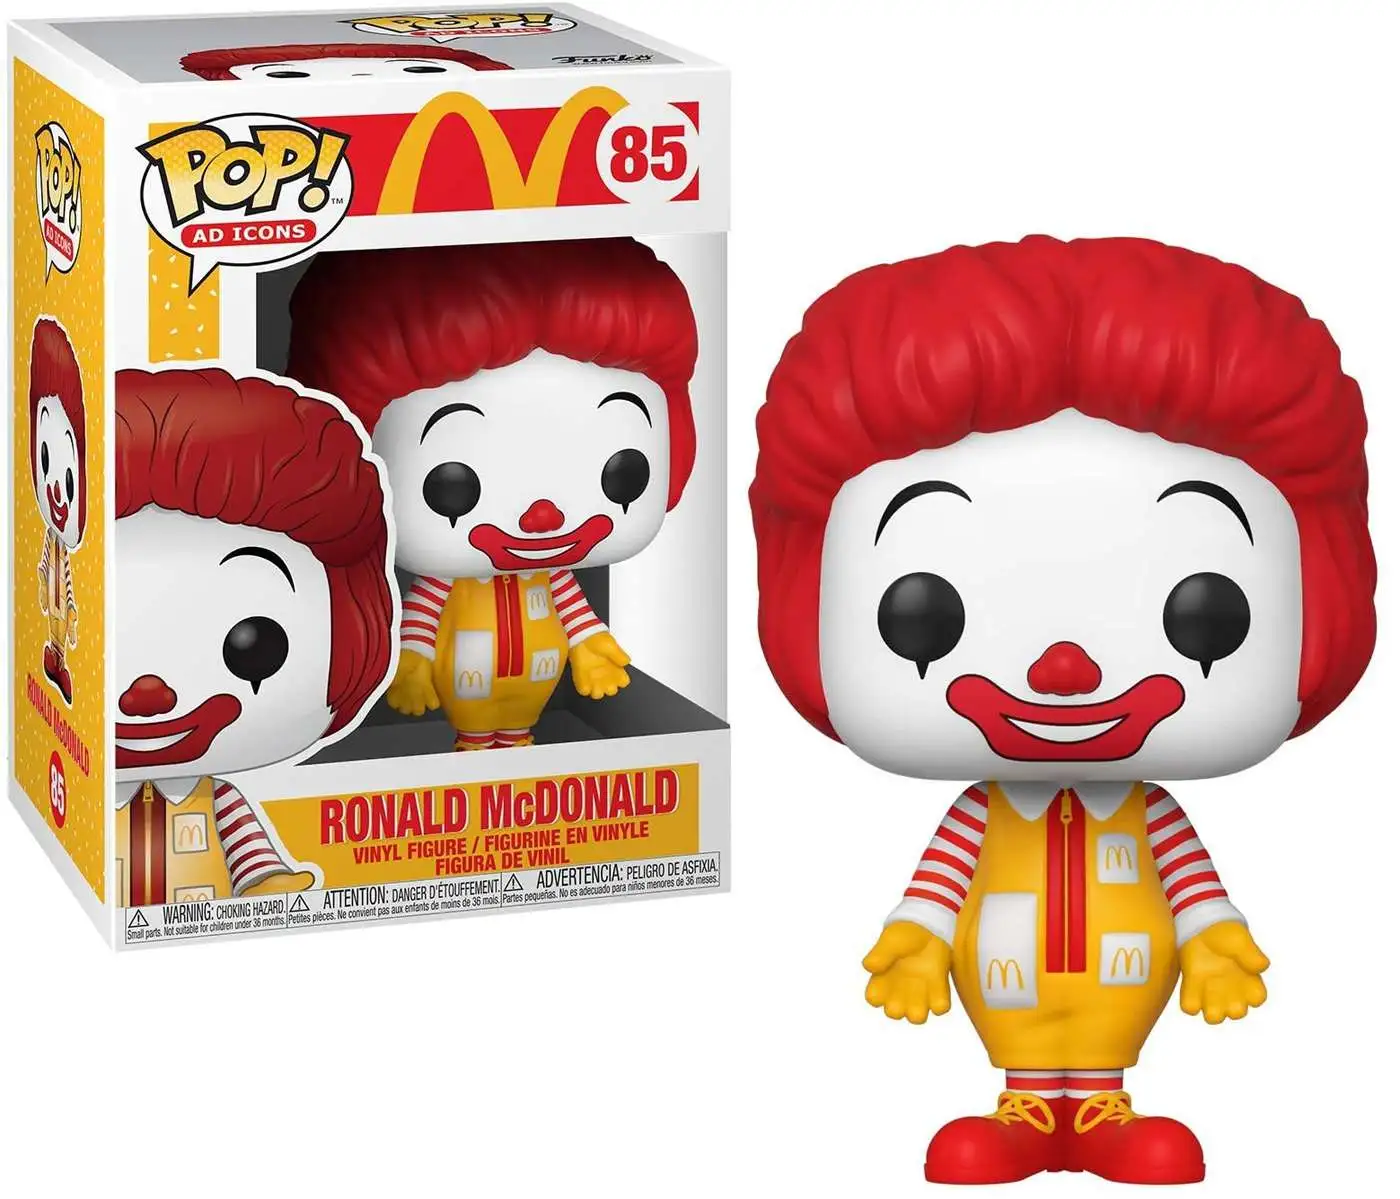 Details about   Funko POP Ronald McDonald 85 McDonalds Ad Icons 45722 NIB In Stock 